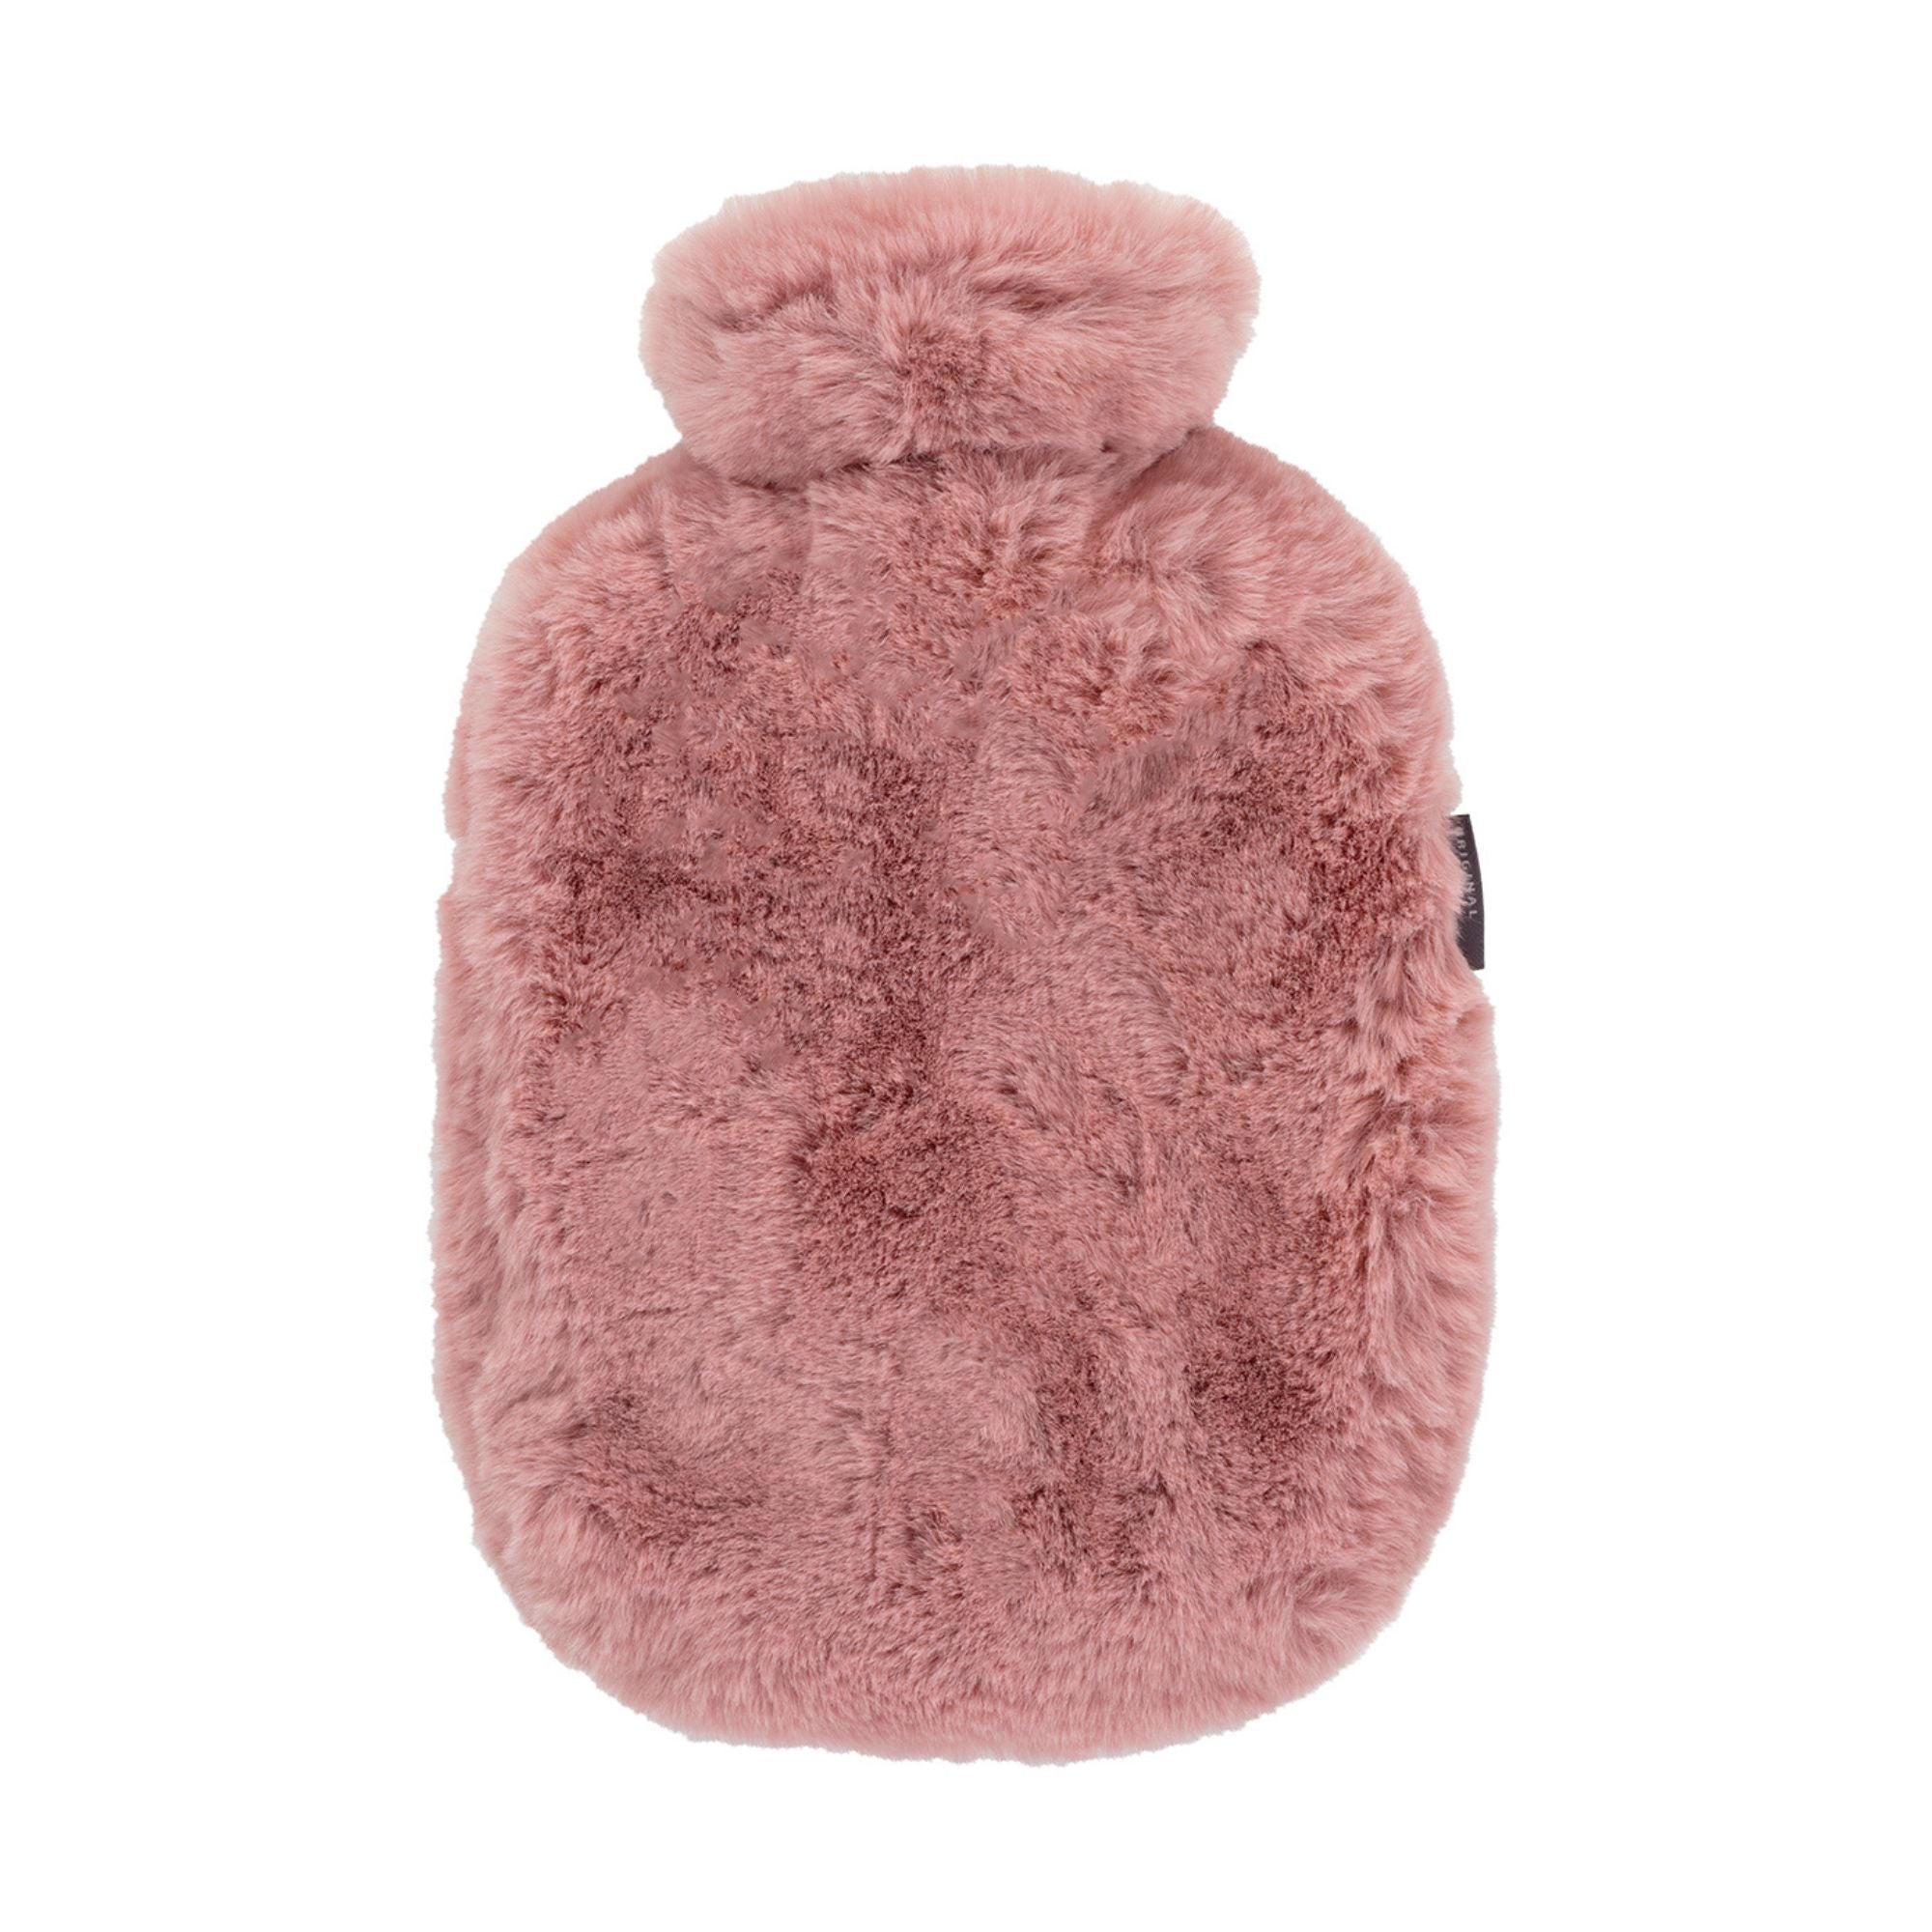 2 Litre Fashy Hot Water Bottle with Blush Pink Extra Soft Cover